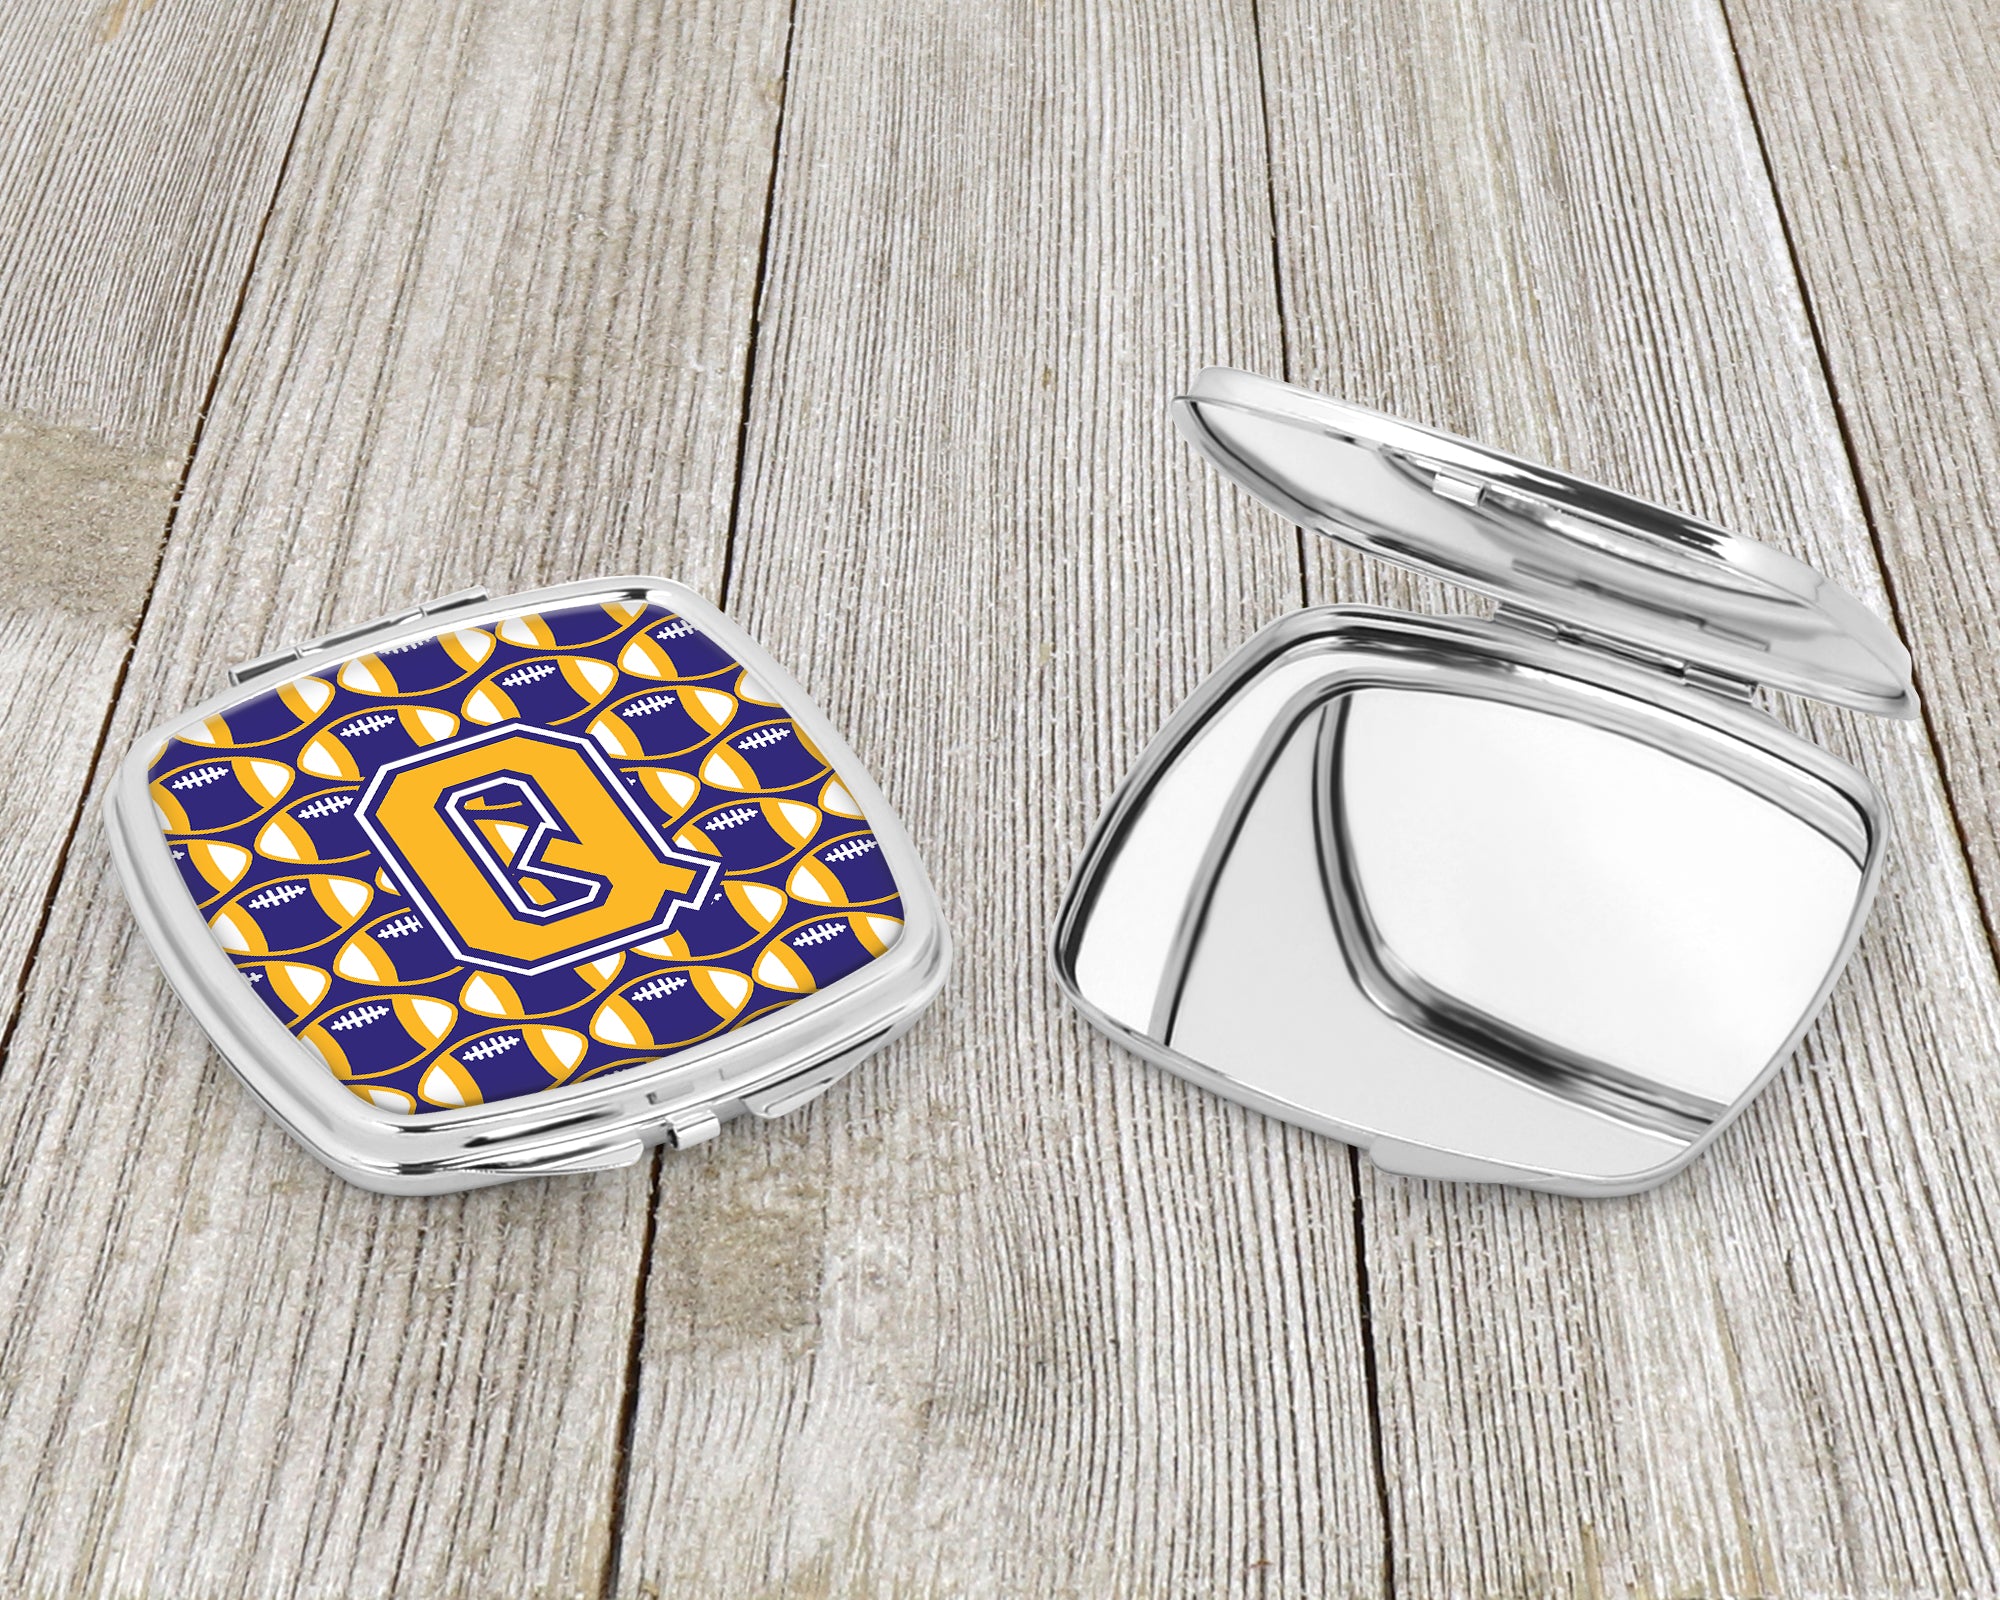 Letter Q Football Purple and Gold Compact Mirror CJ1064-QSCM  the-store.com.